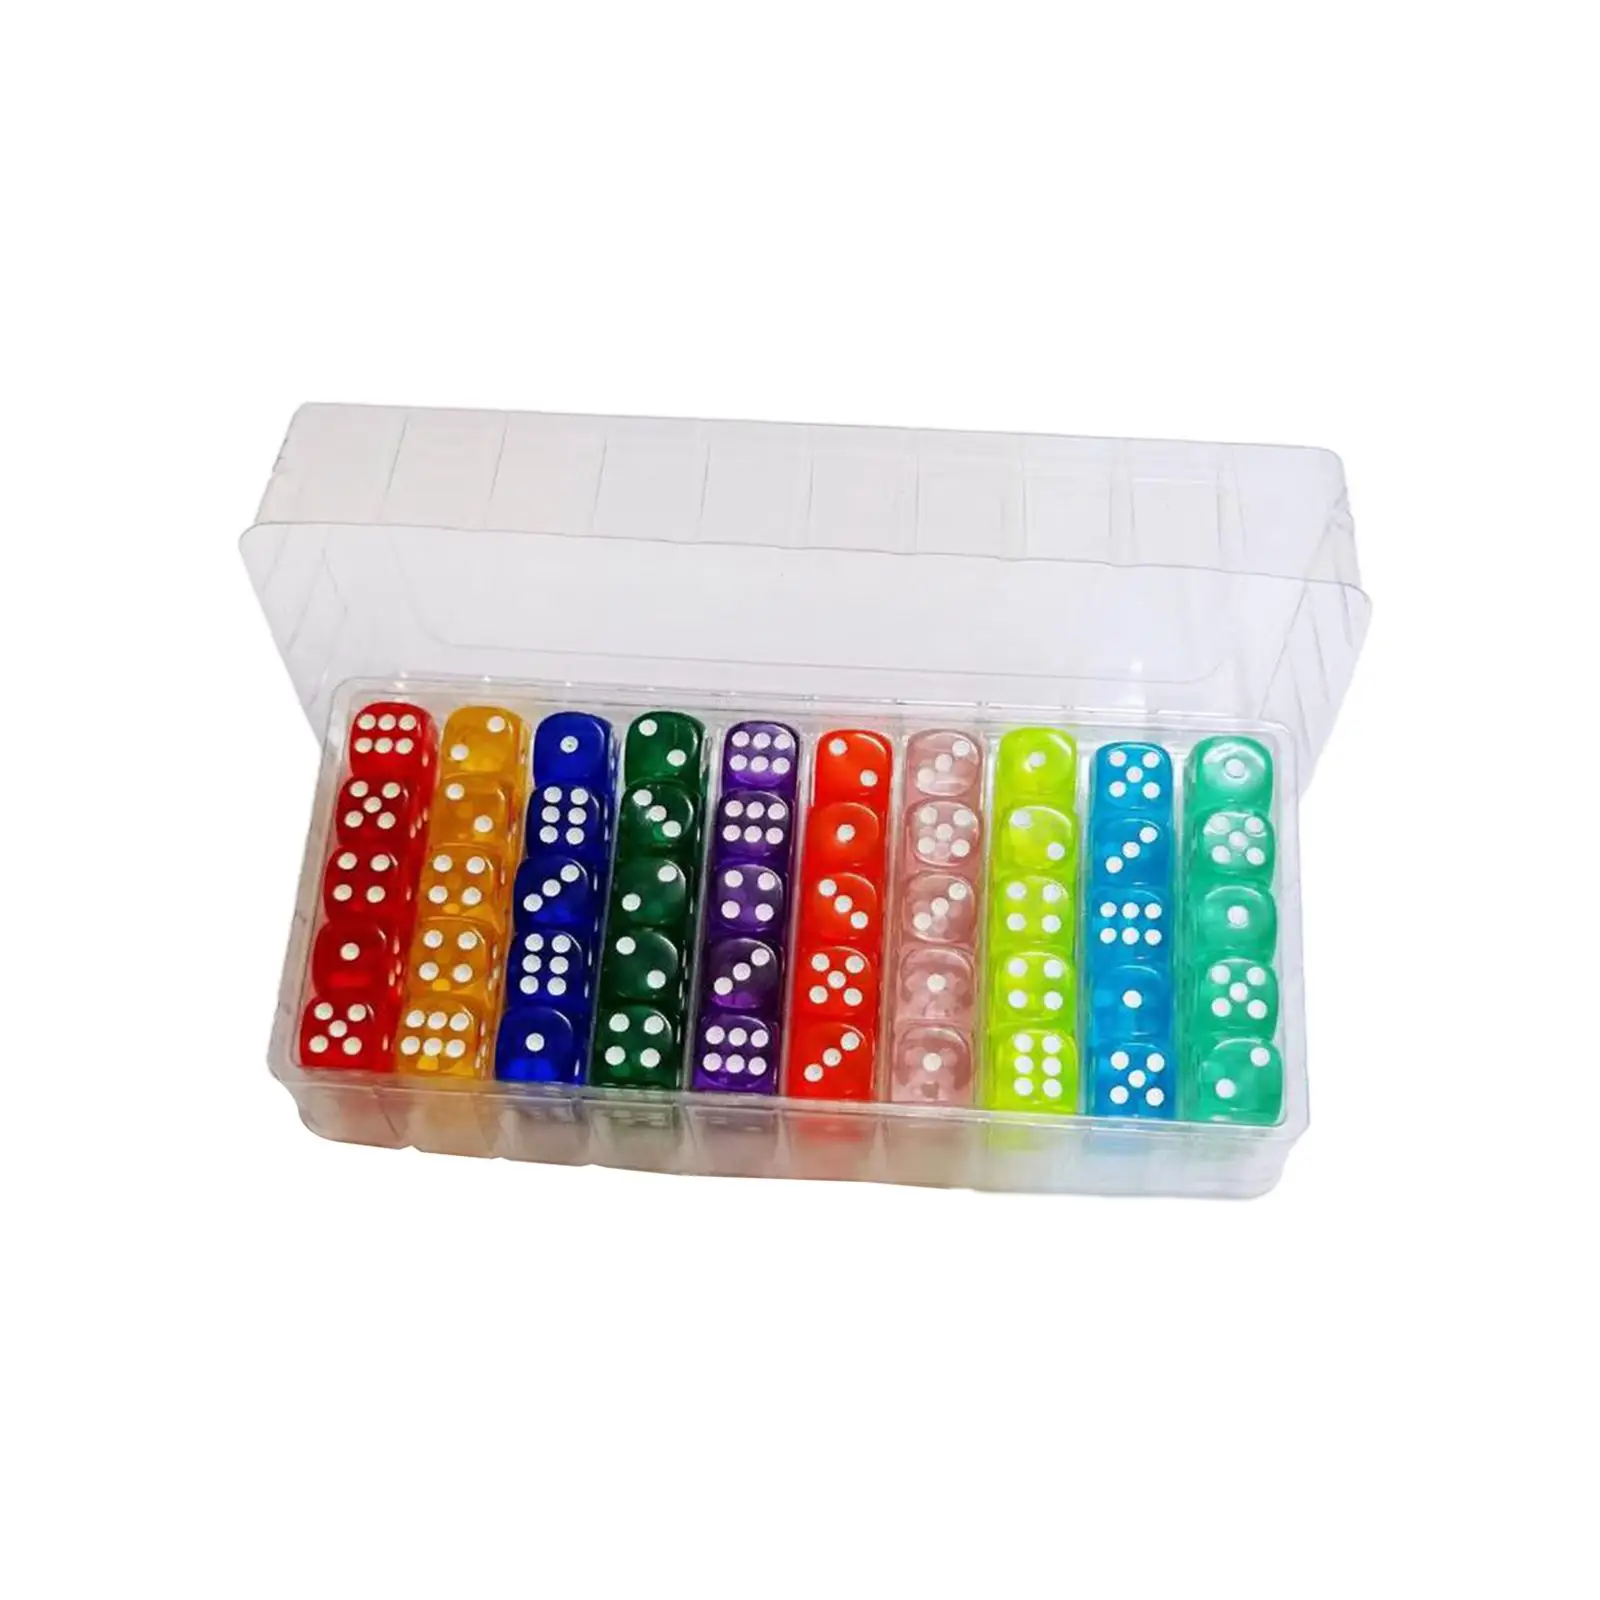 

100Pcs 6 Sided Dice Set Translucent Colors Acrylic Dice Round Corner 14mm for Playing Games Party Favors Gifts Teaching Math